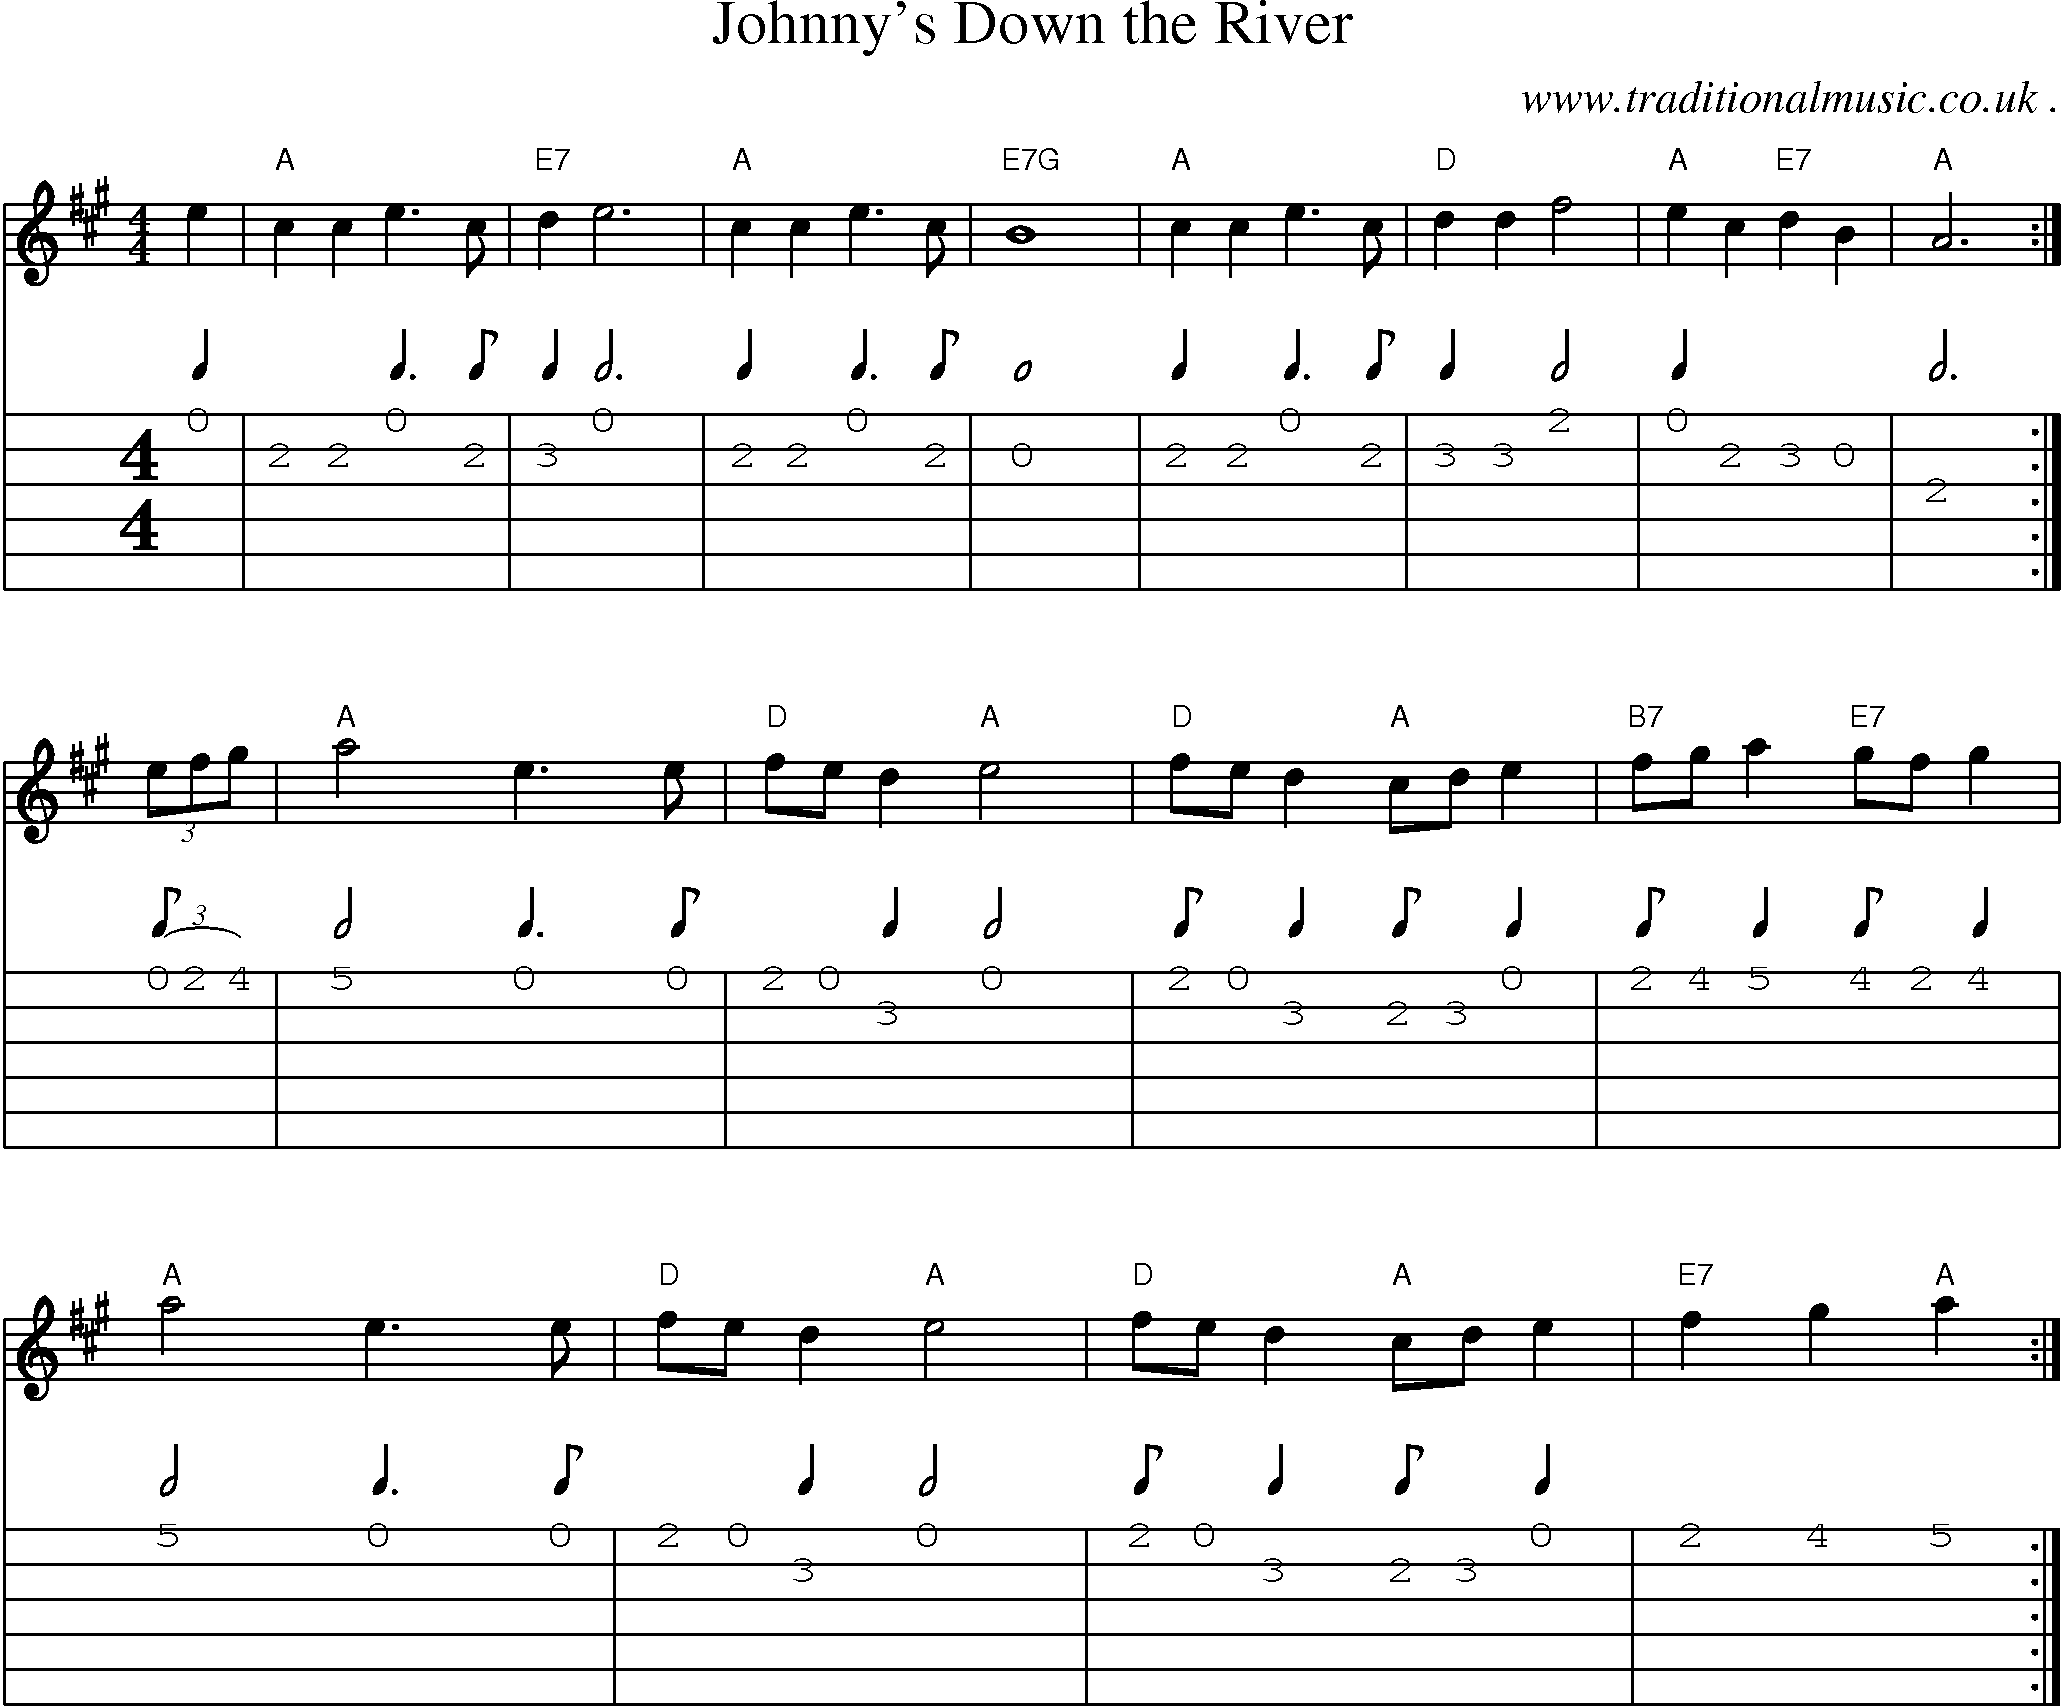 Sheet-Music and Guitar Tabs for Johnnys Down The River